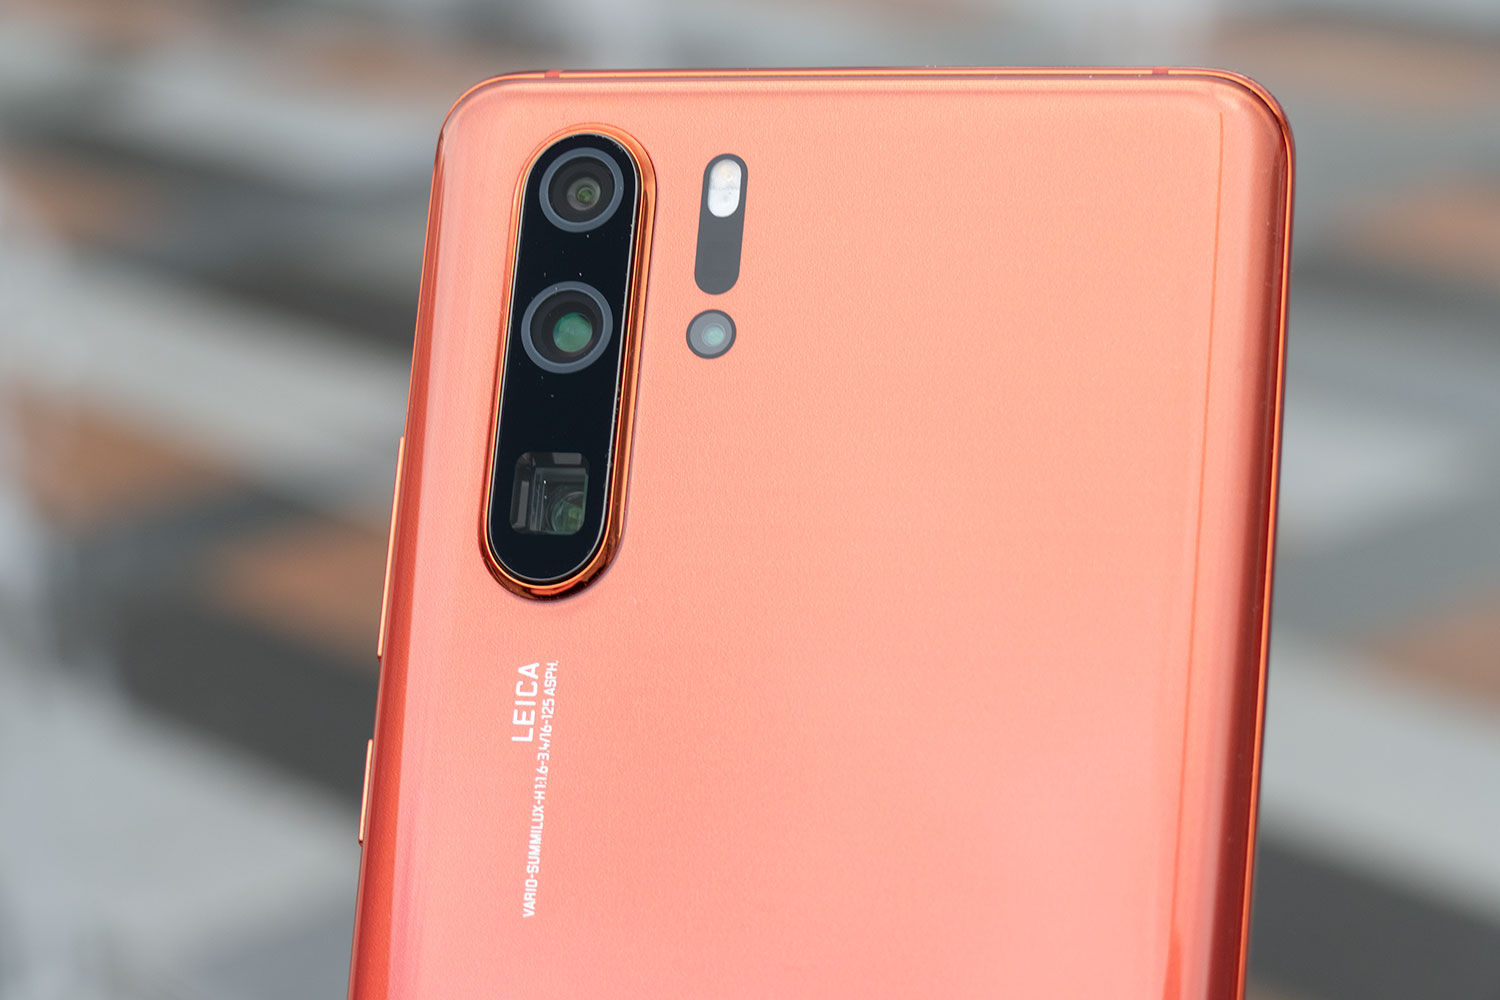 Huawei P30 Pro Smartphone Review